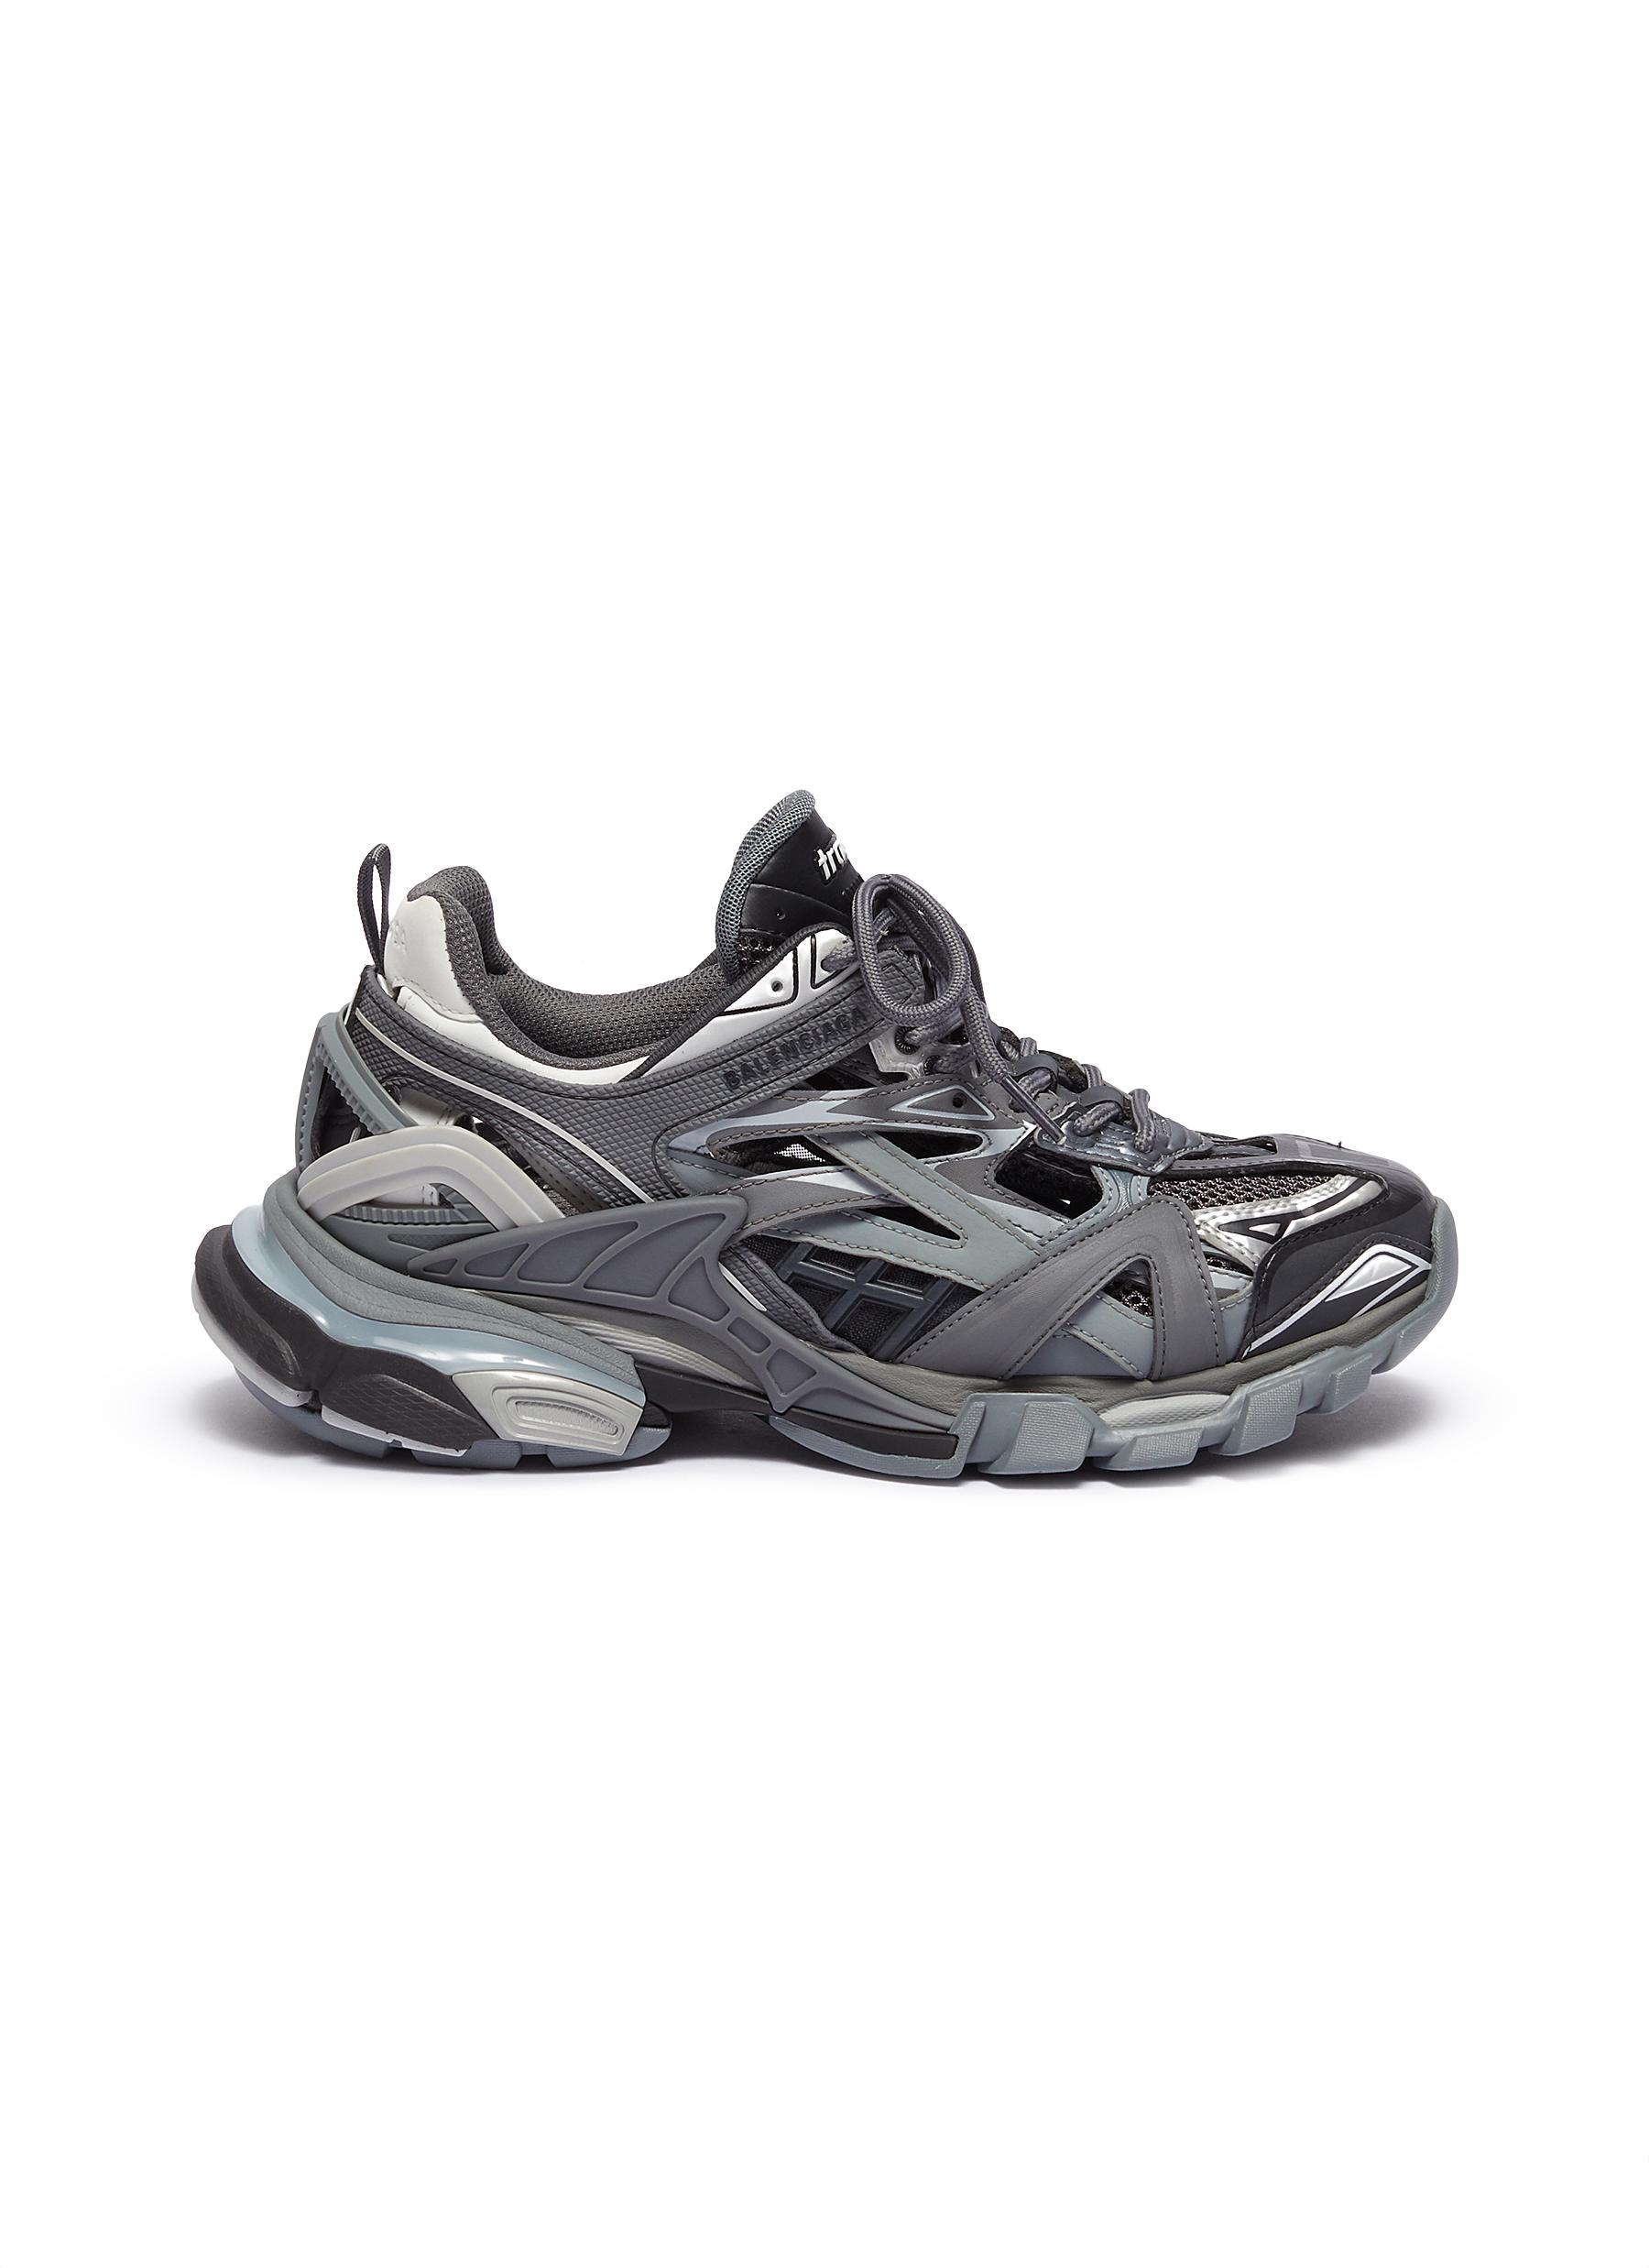 Balenciaga Rubber Grey Track.2 Sneakers in Gray - Save 1% - Lyst